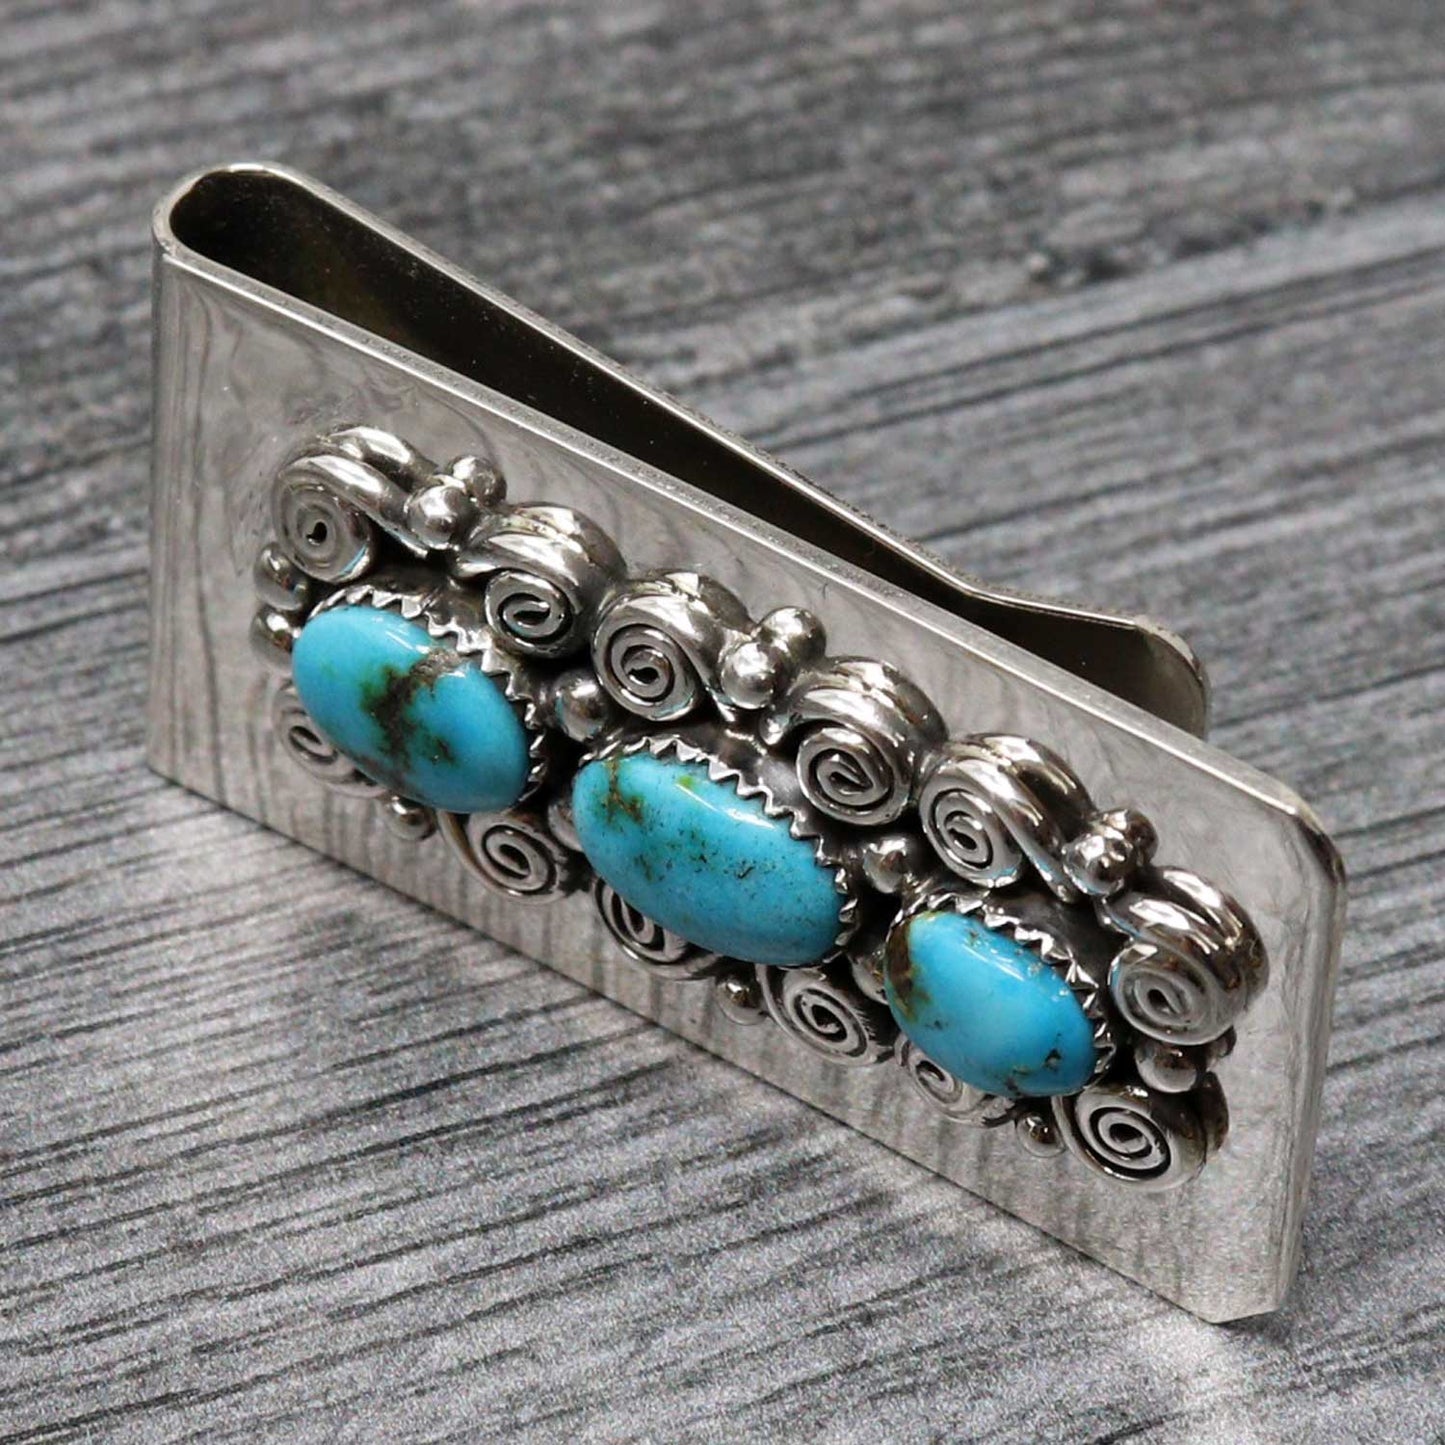 3 Stone Turquoise Money Clip by Jan Mariano